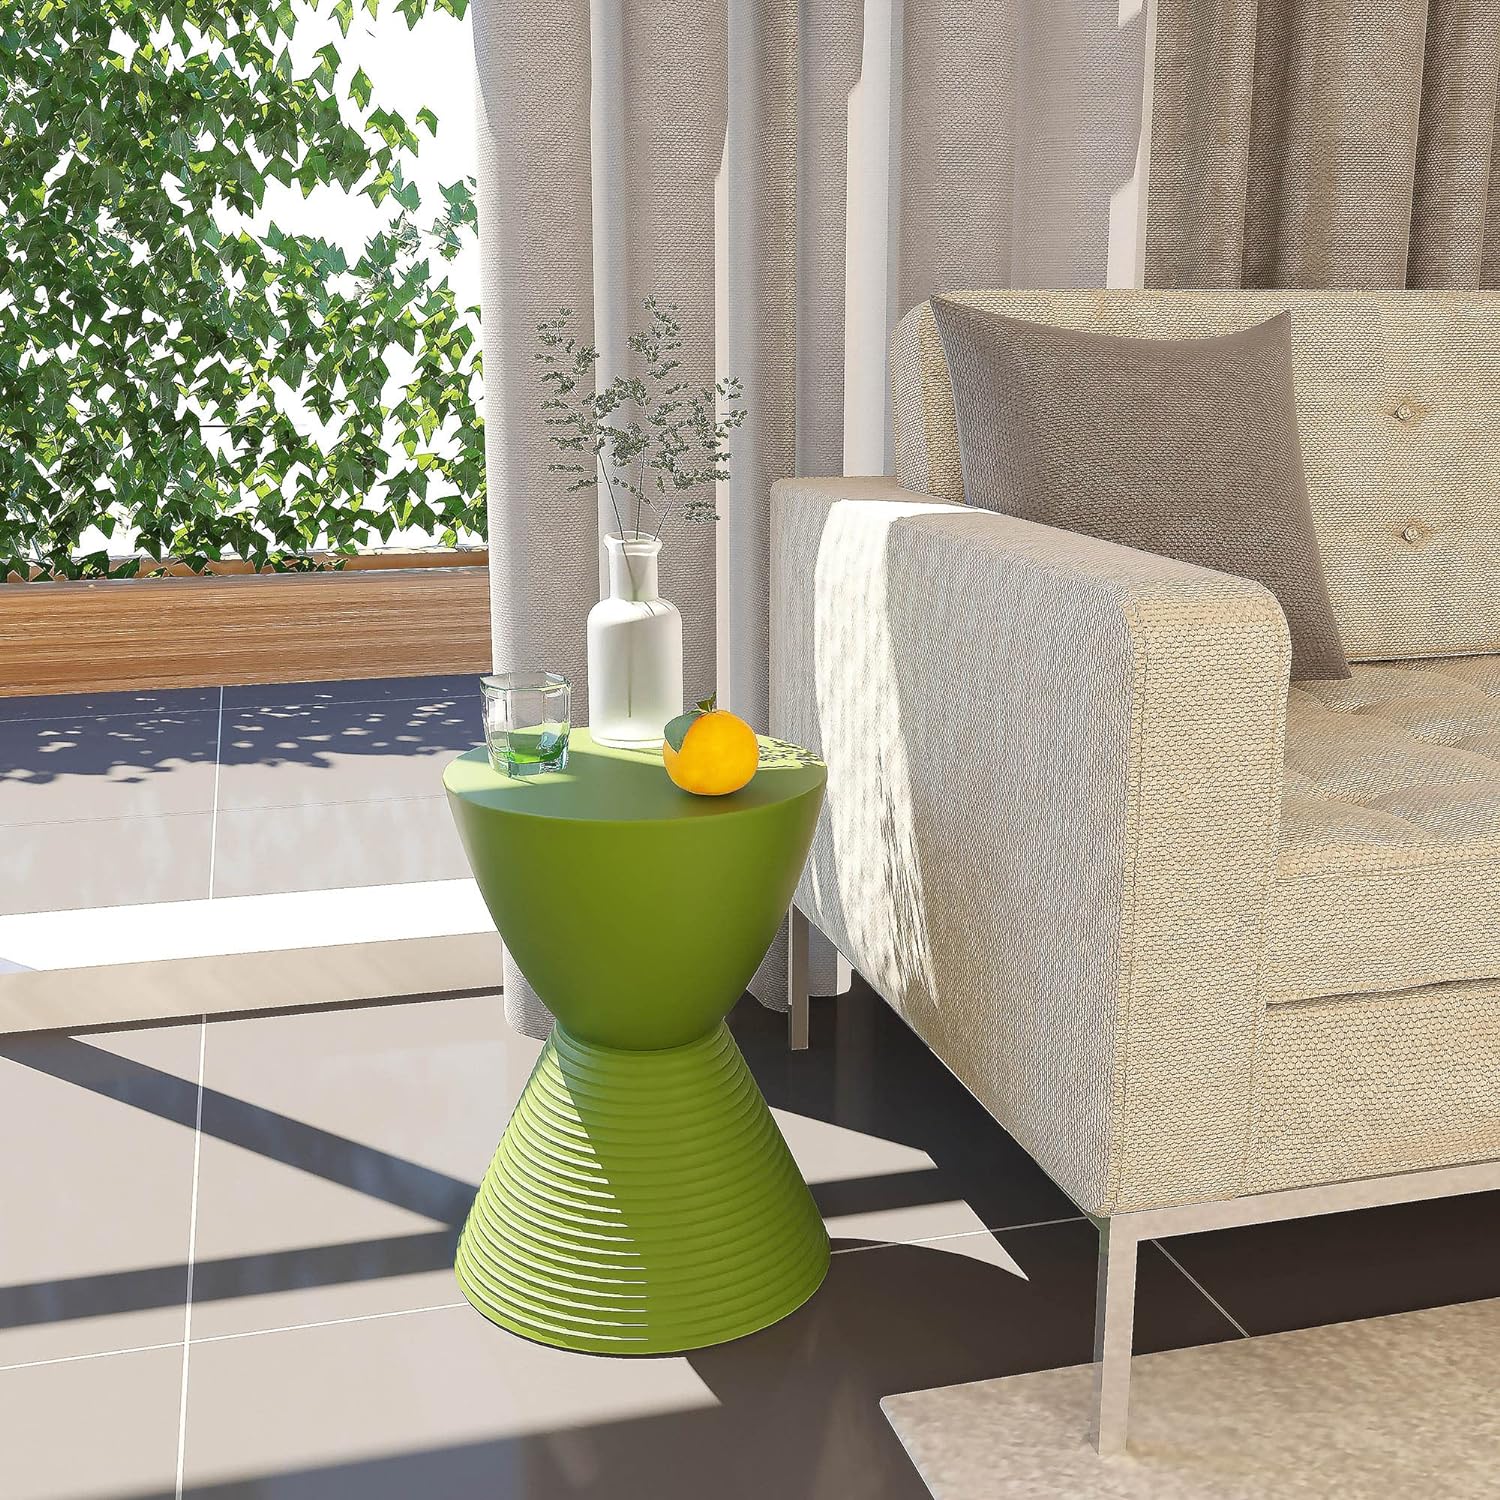 LeisureMod Modern Boyd Side Table Indoor and Outdoor Use, 16.75" H x 11.75" W x 11.75" D (Green)